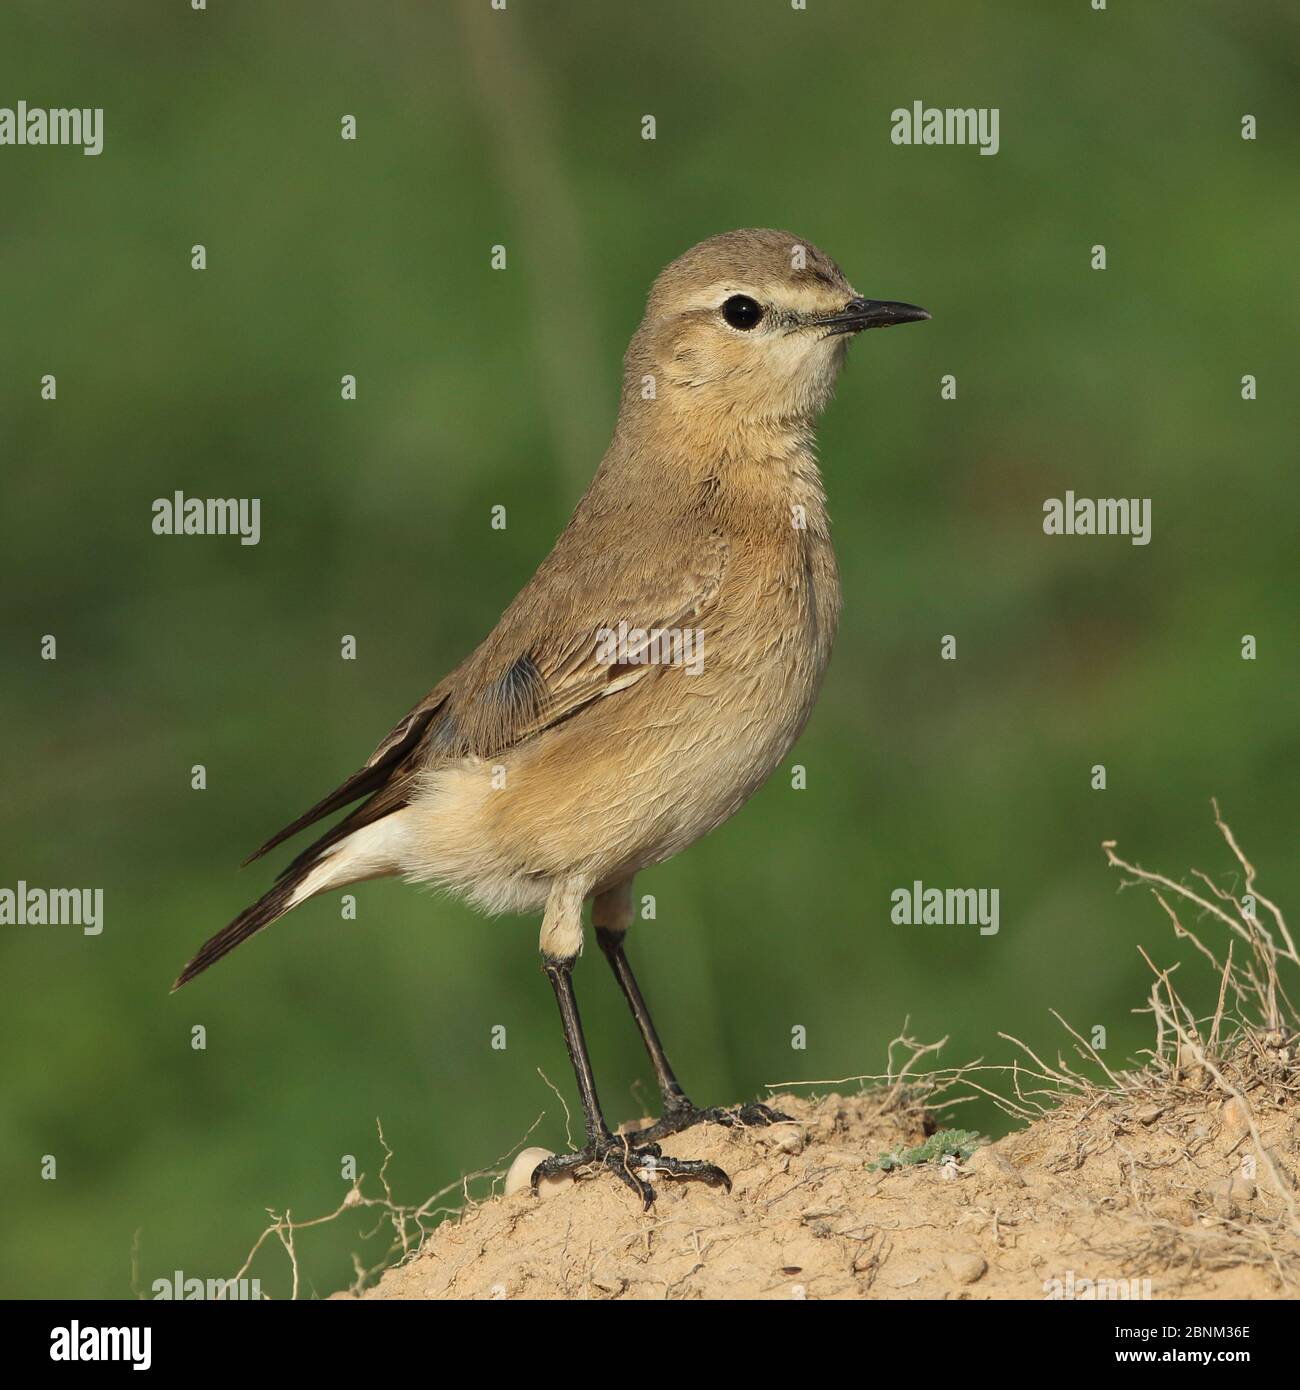 Isabelline Wheatear (Oenanthe isabellina) Oman, mars Banque D'Images